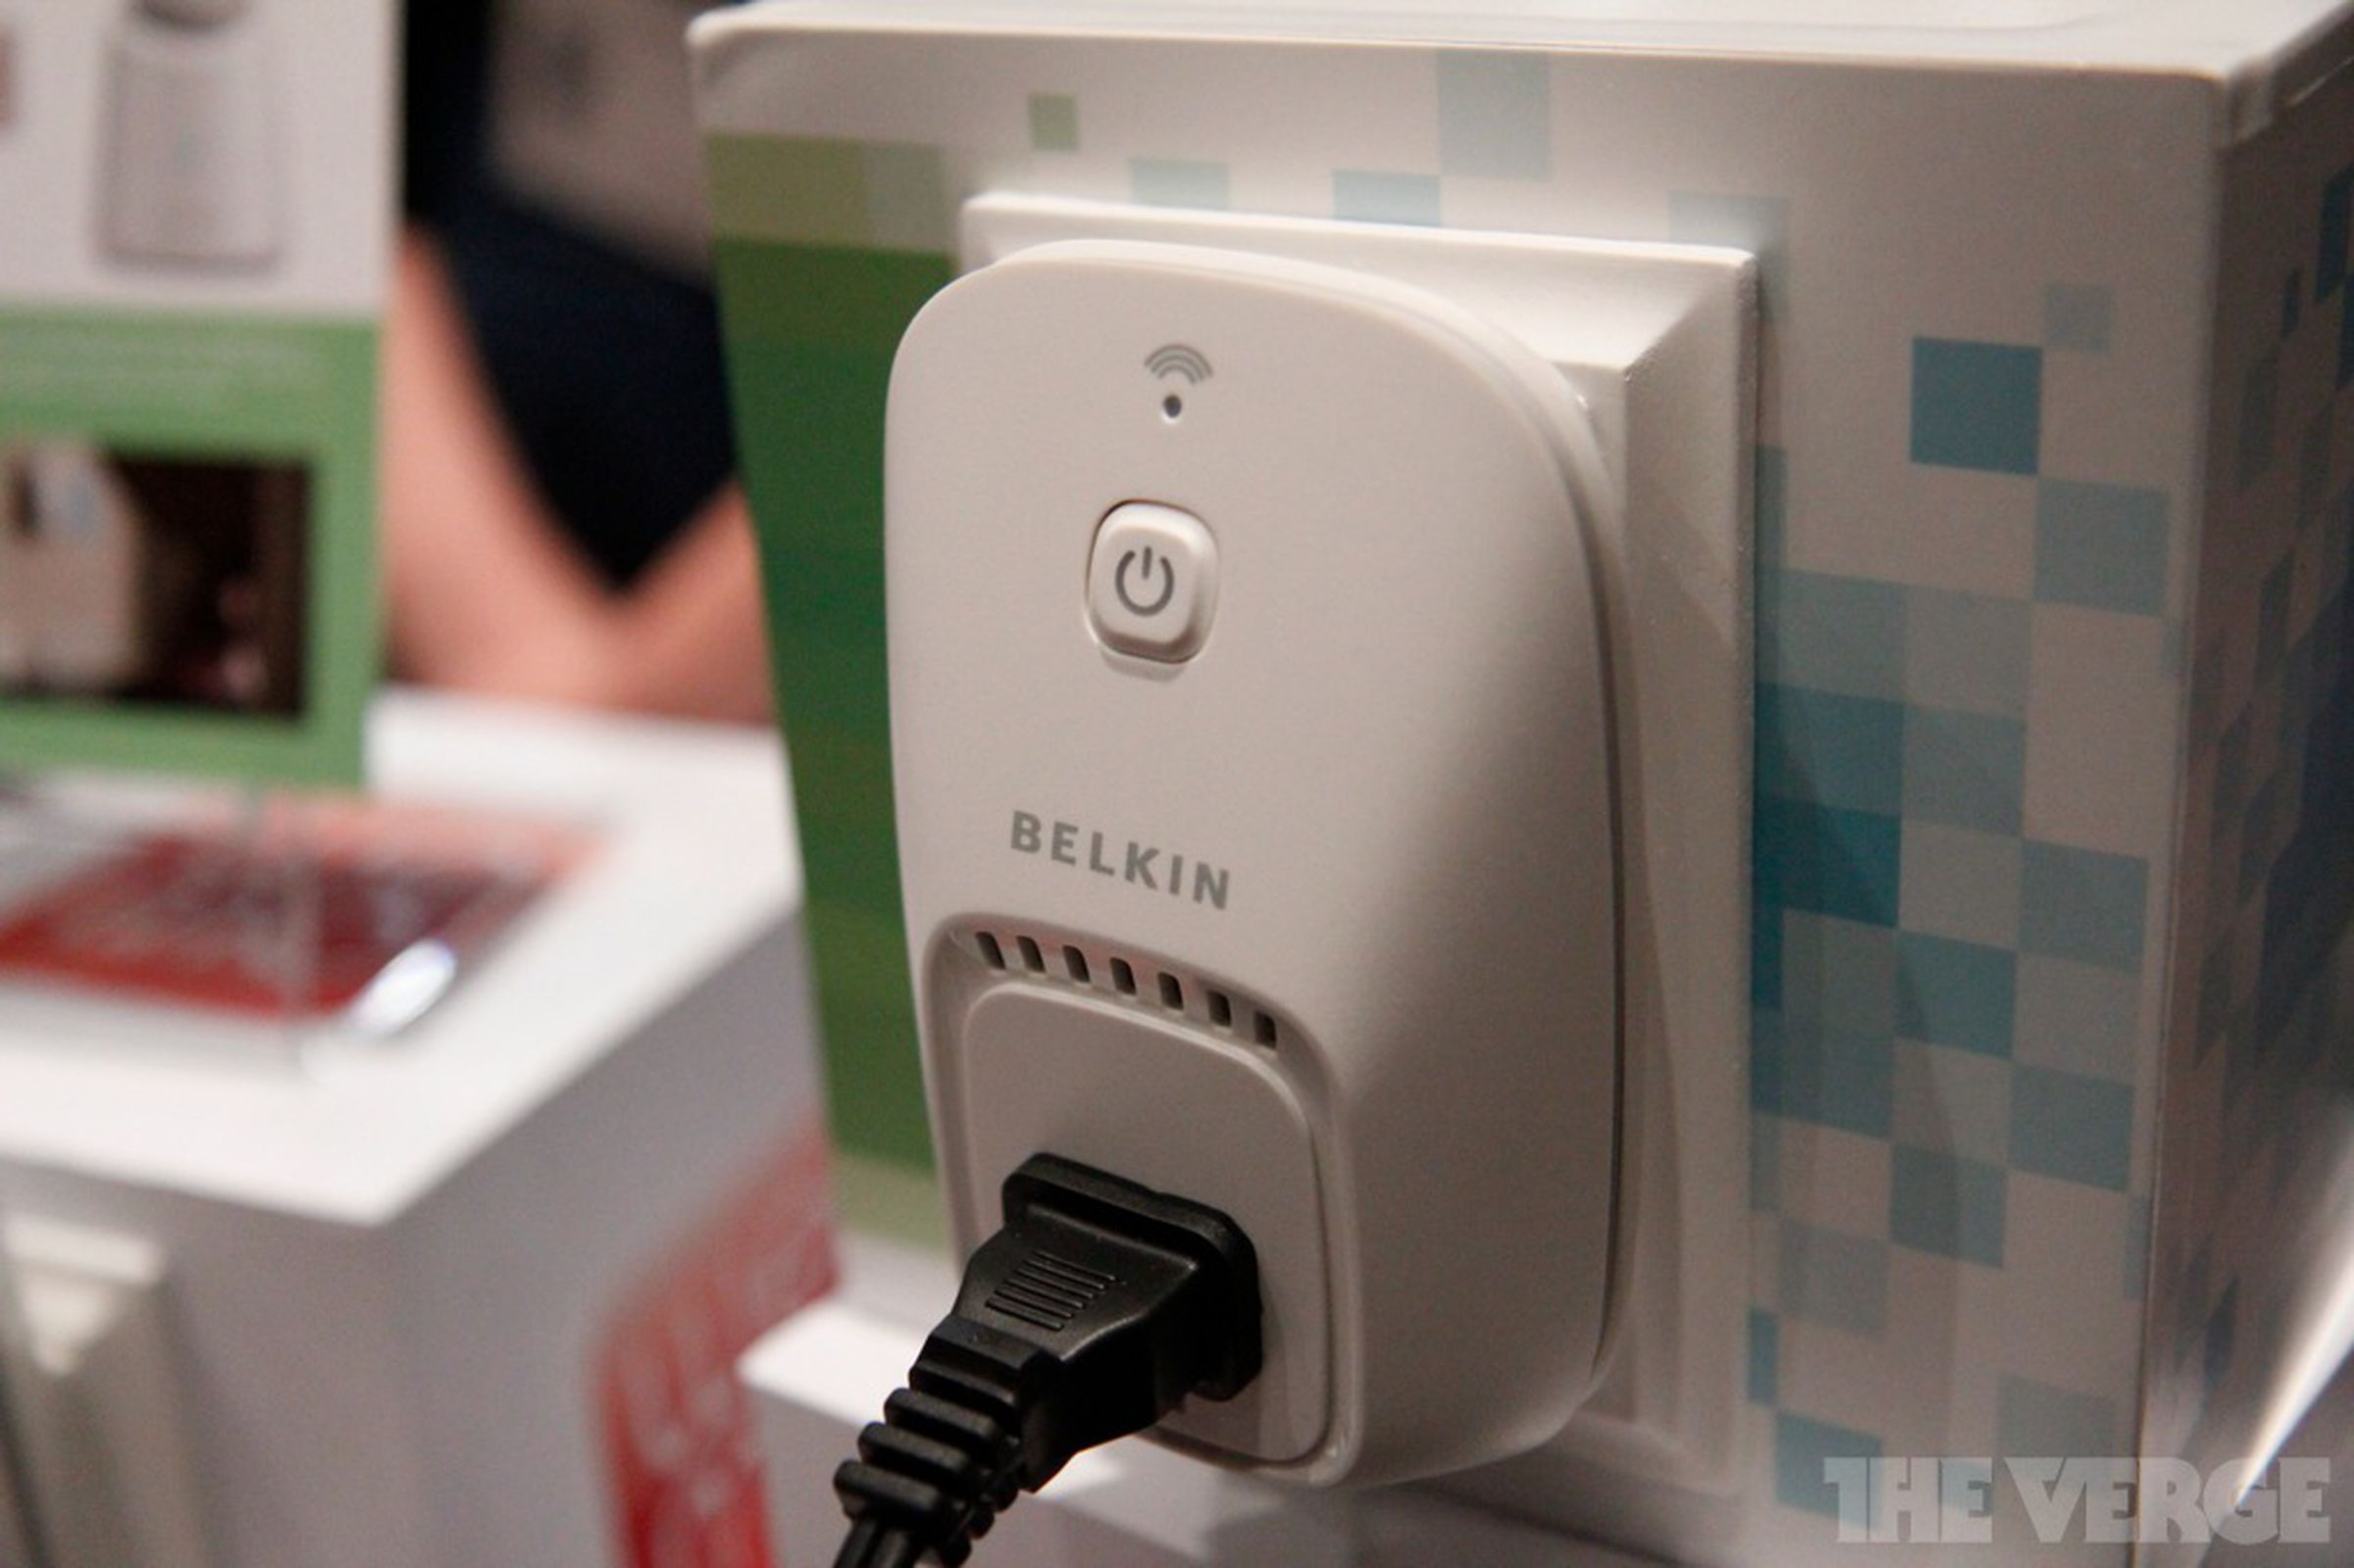 Belkin Wemo Motion Sensor and Home Control Switch pictures